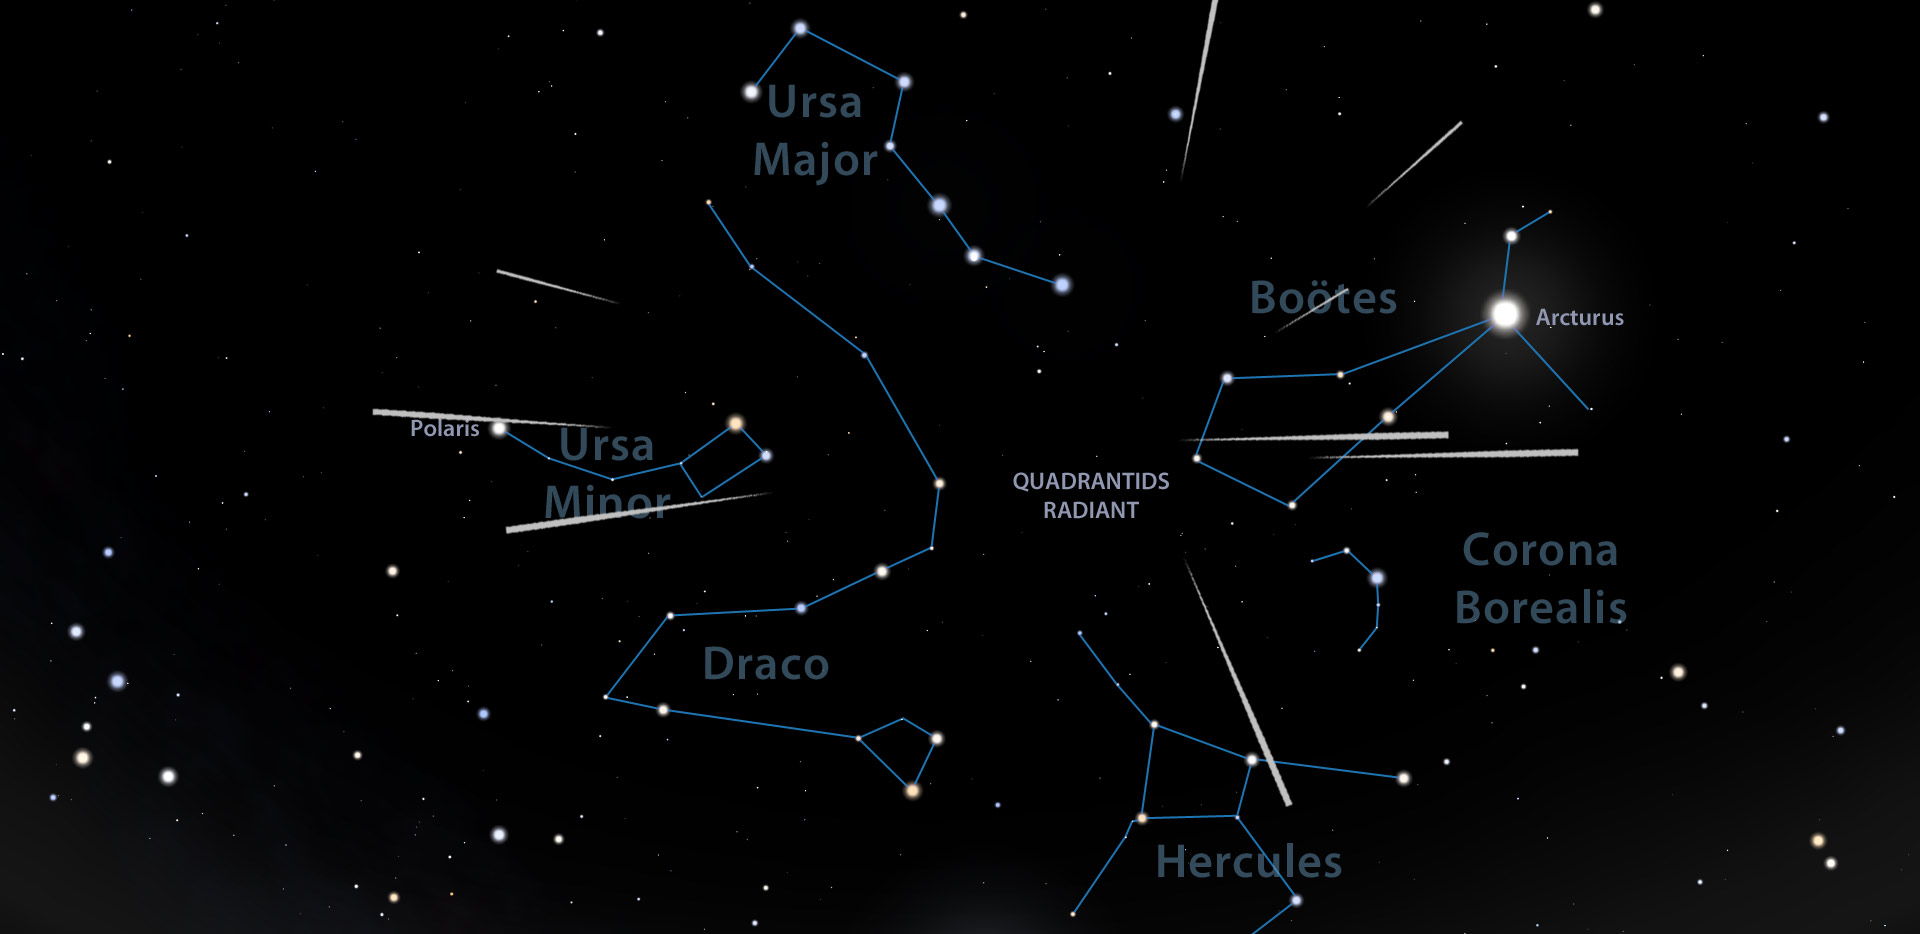 Meteor Shower Prospects for 2014 and other Astronomical Highlights